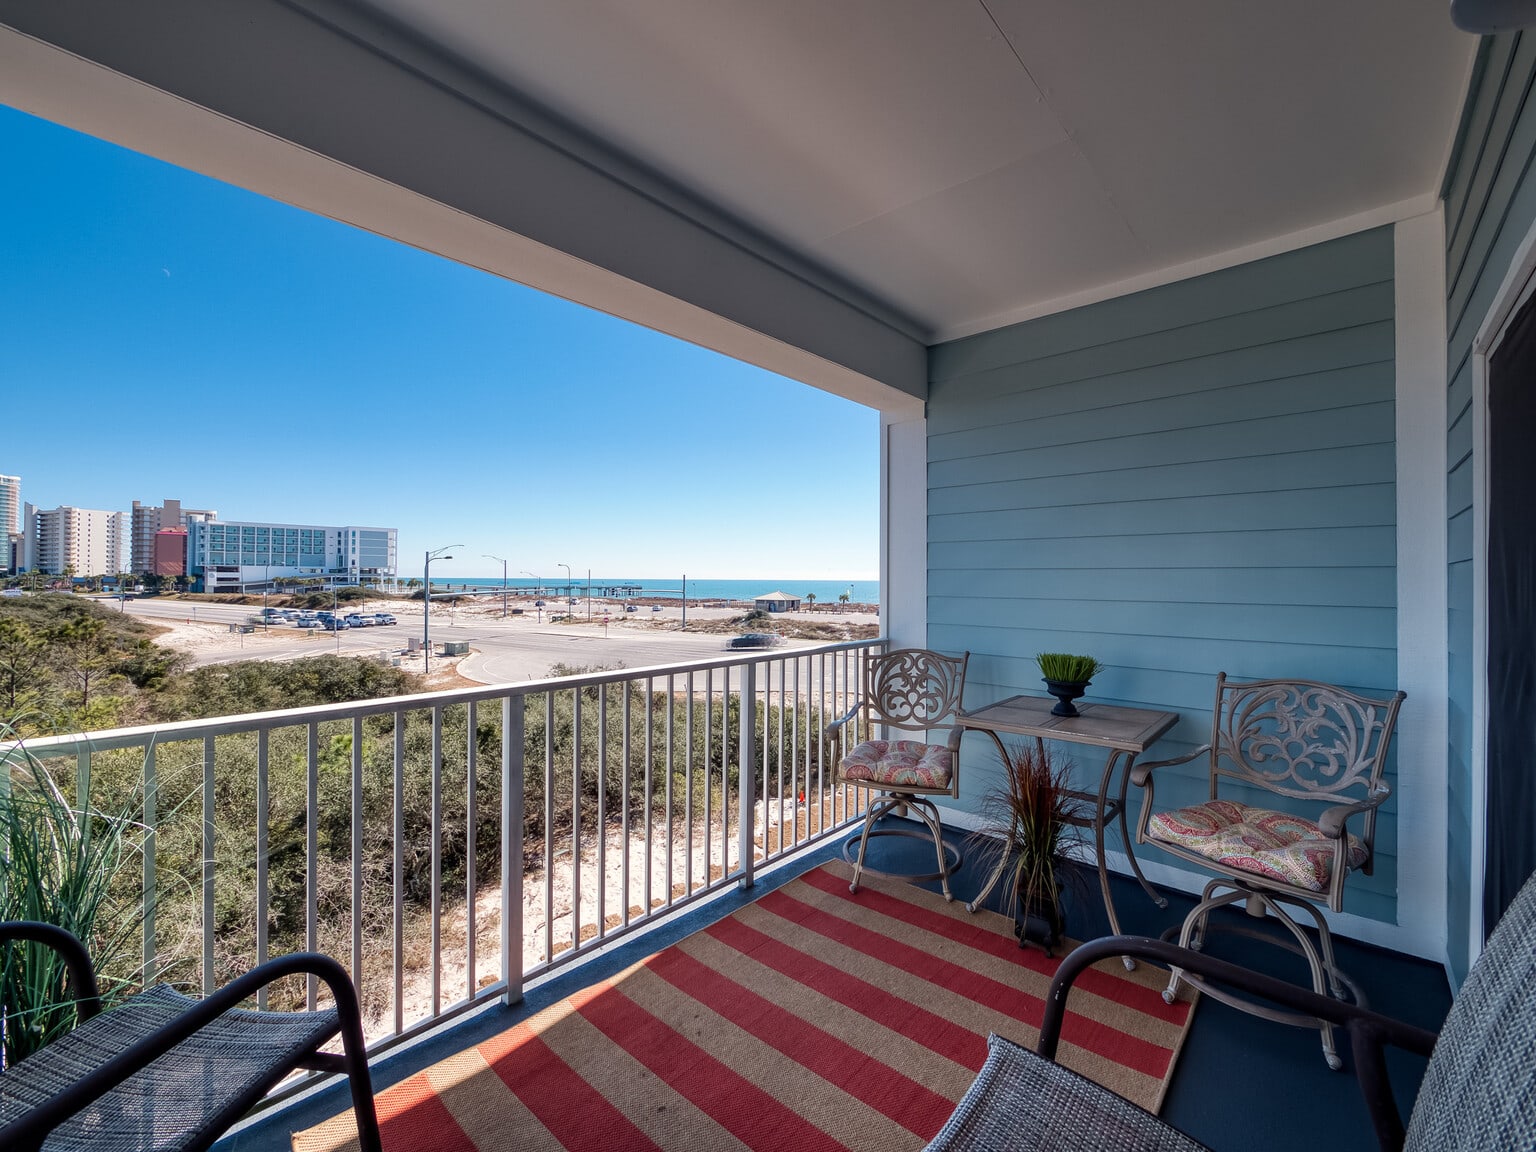 Property Image 1 - Fantastic condo in Orange Beach with views of the Gulf and Cotton Bayou